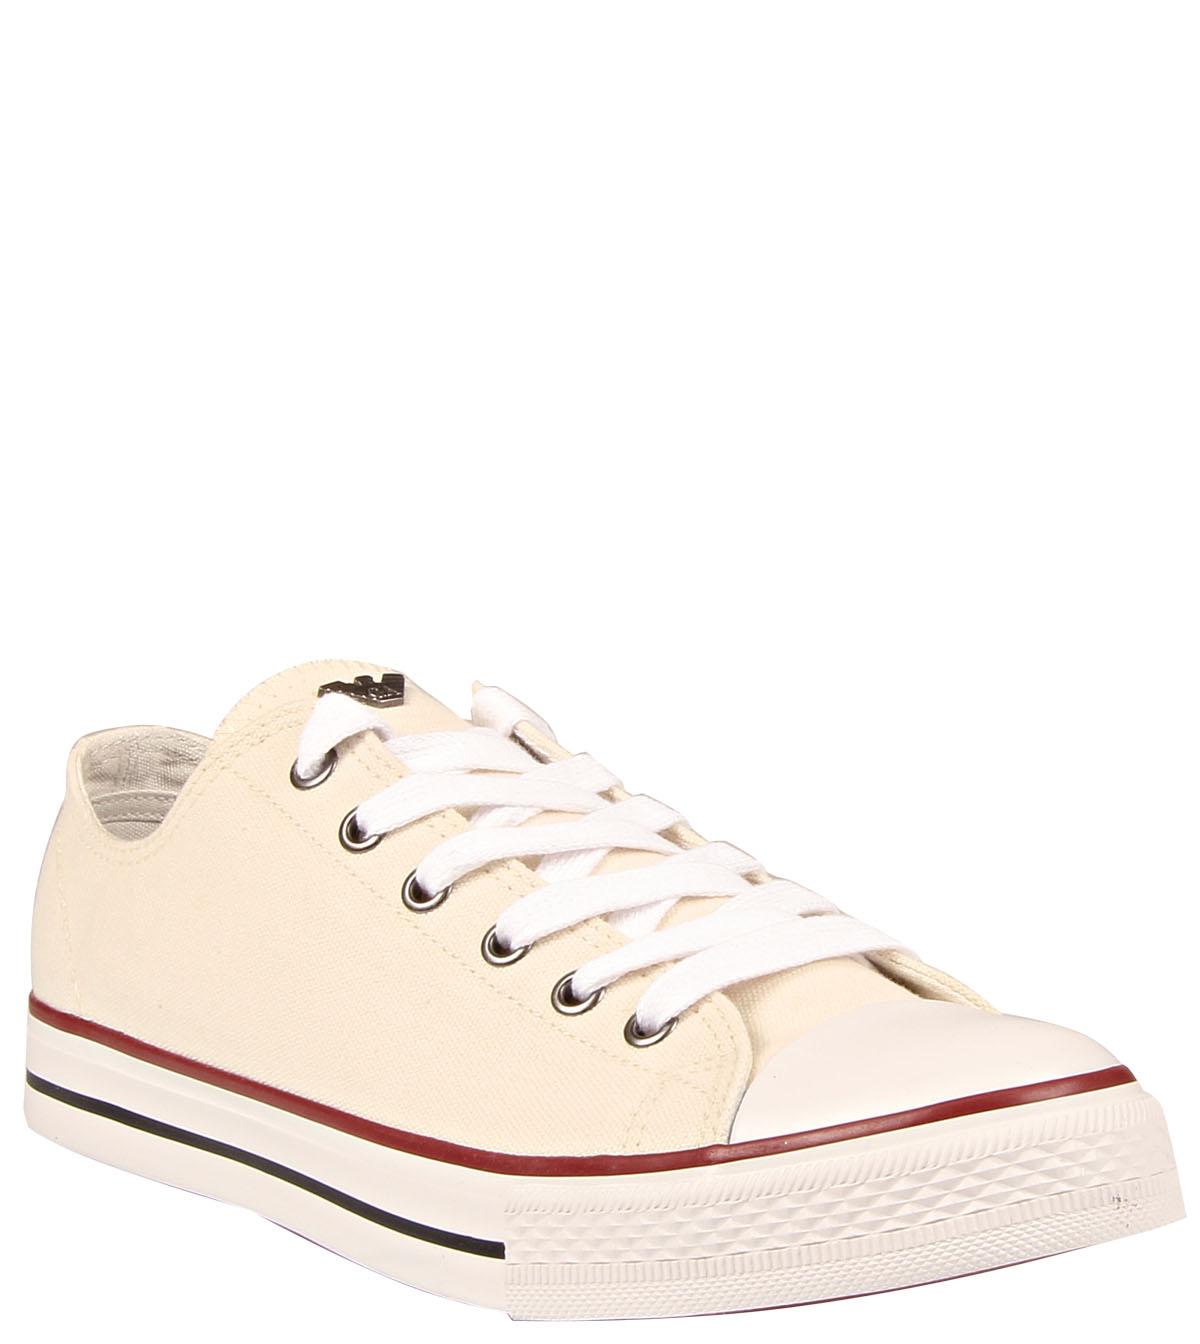 Foto Armani Jeans Cream Woven Canvas 6 Eyelet Trainer-UK 7 1/2